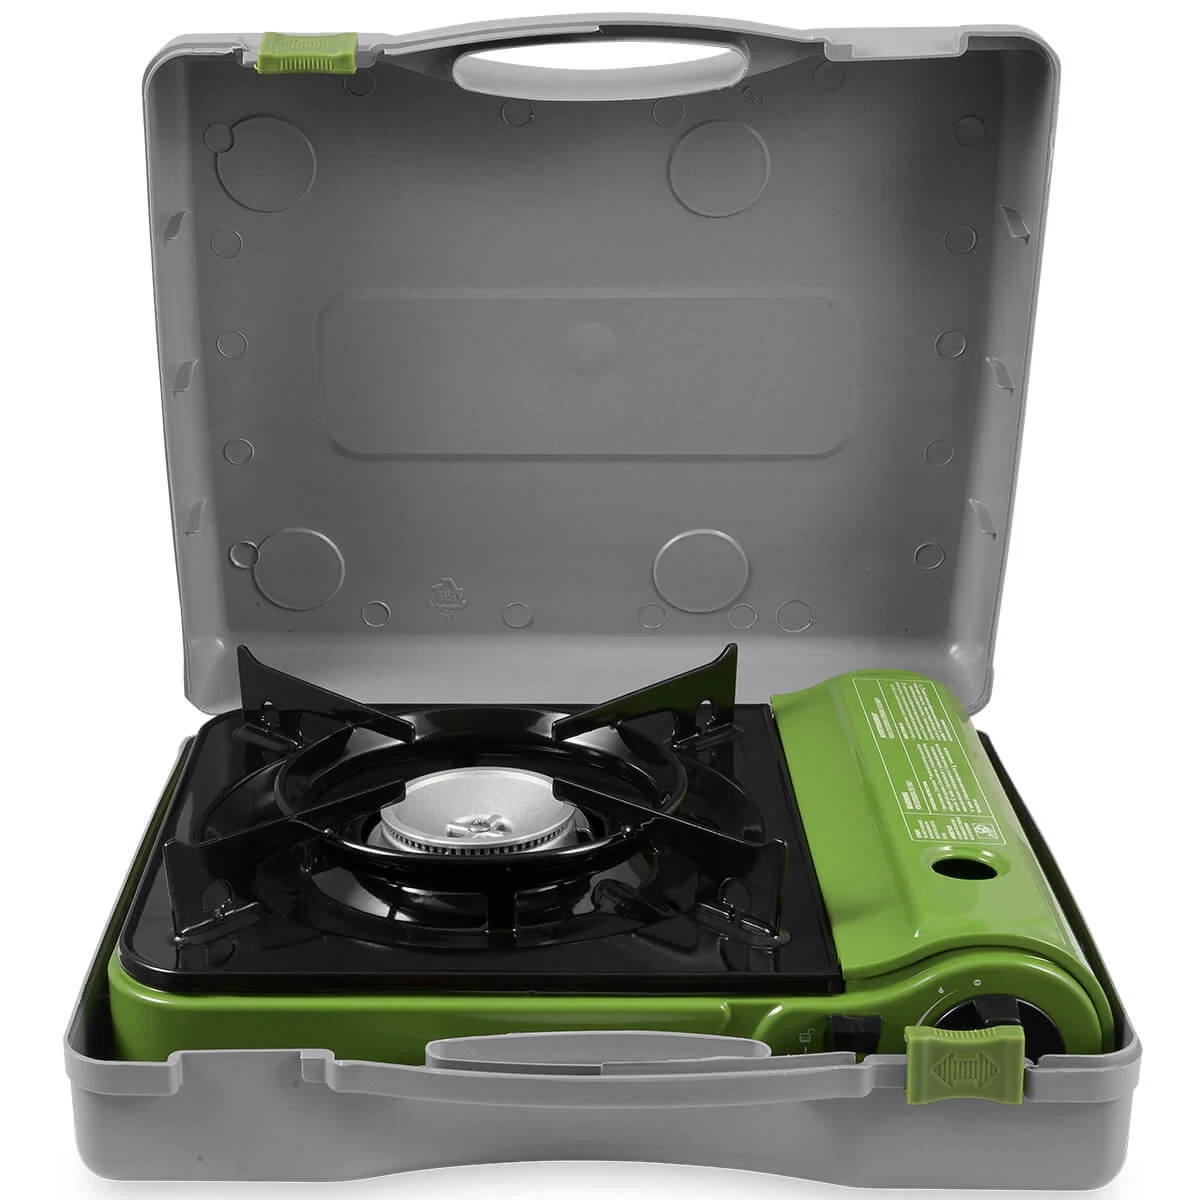 SPRK Camp Stove™ Compact, all-in-one design